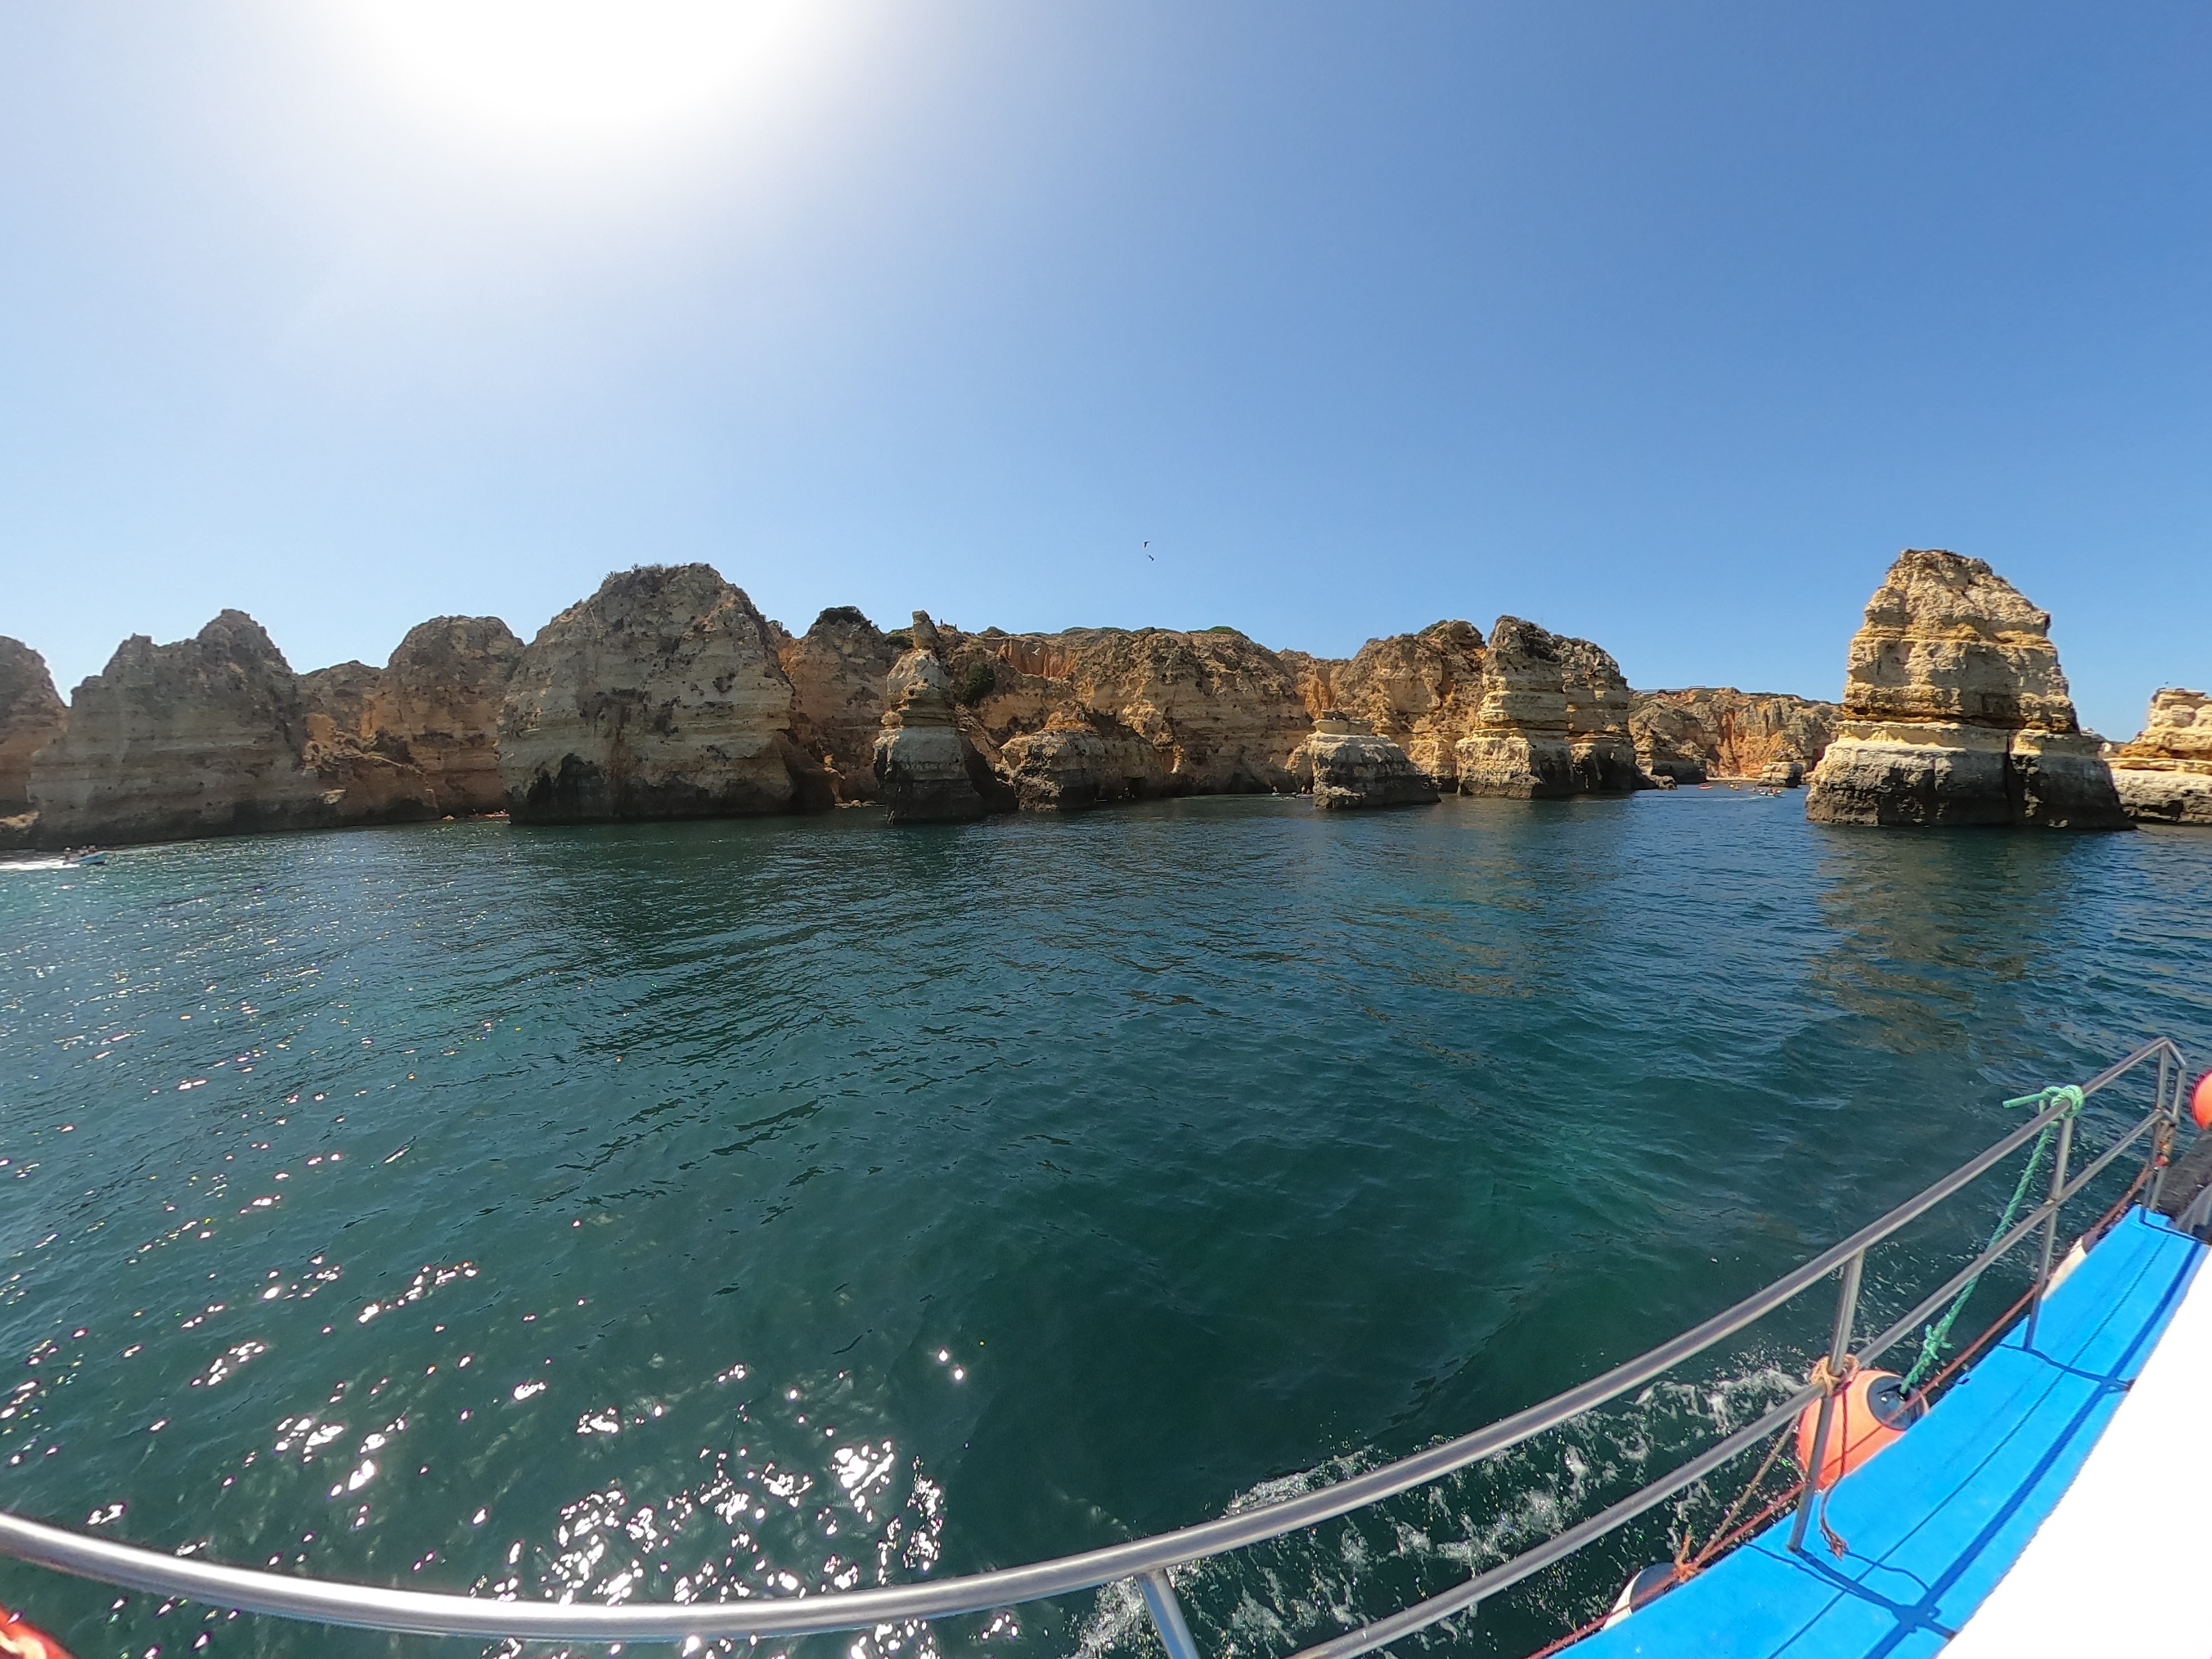 Boat tour from Alvor to Lagos